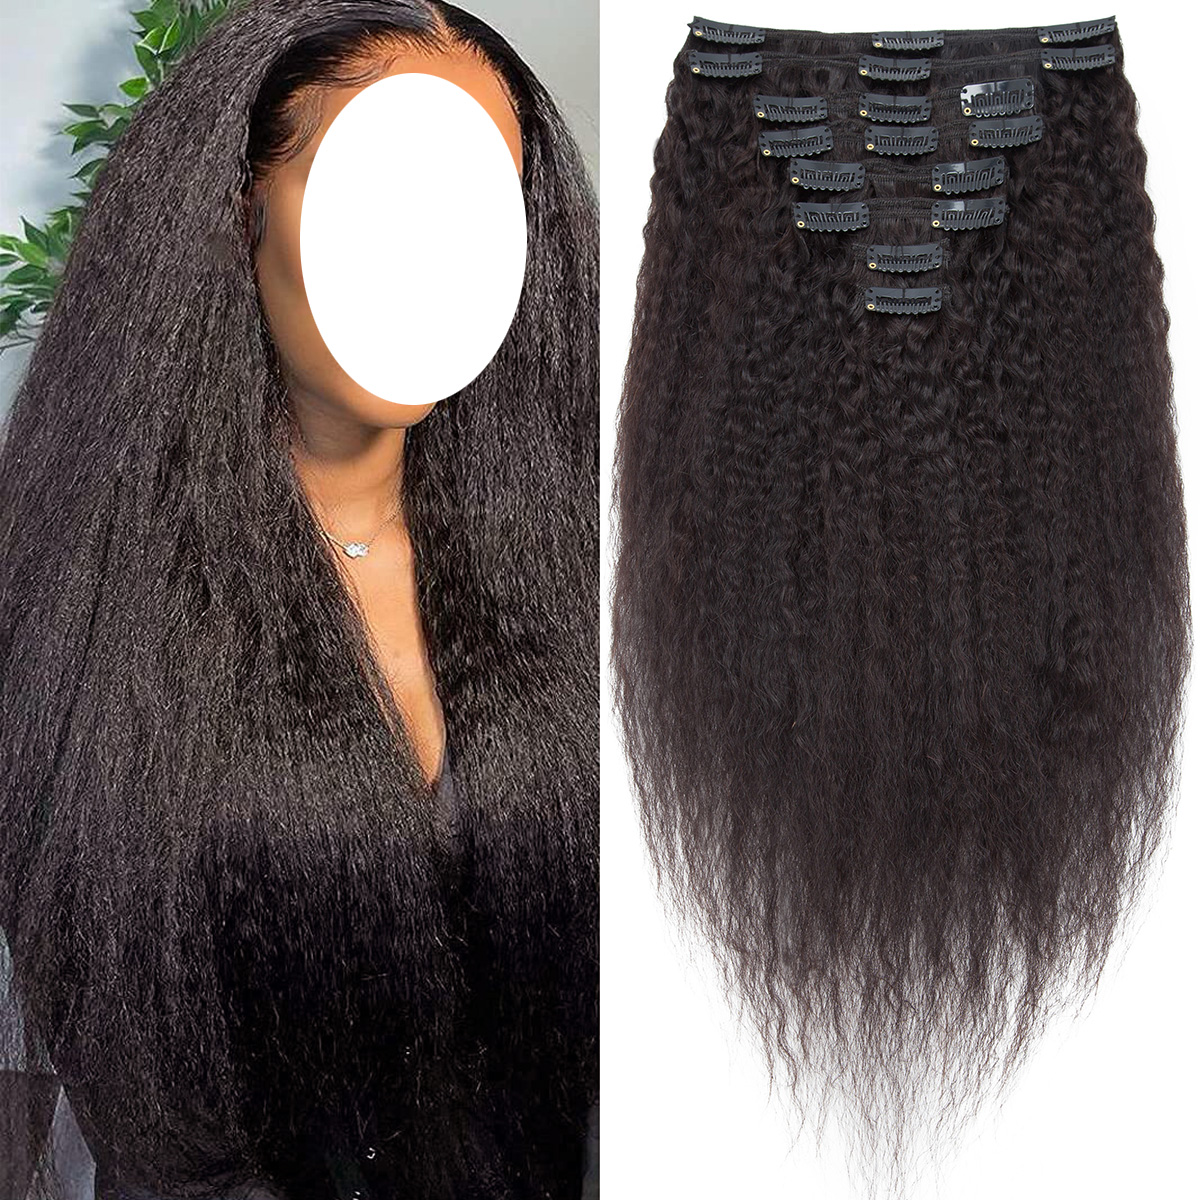 SEGO Kinky Straight Clip in Hair Extensions Real Human Hair for Women Thick Brazilian Hair Natural Black - image 1 of 6